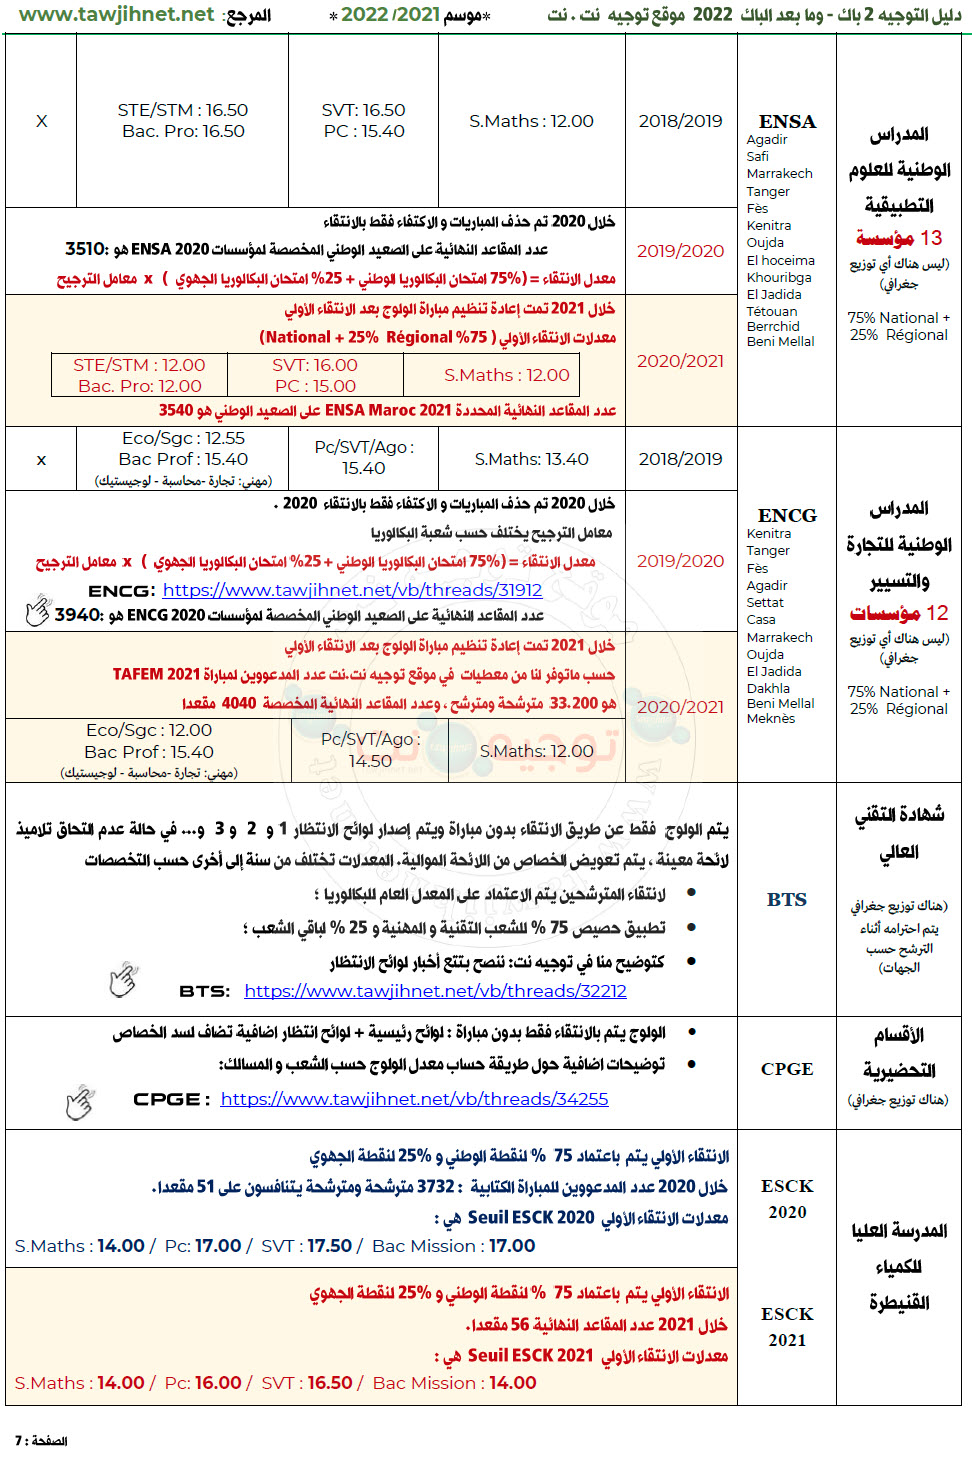 dalil tawjihnet Bac seuils preselection ecoles instituts maroc 2022_Page_4.jpg